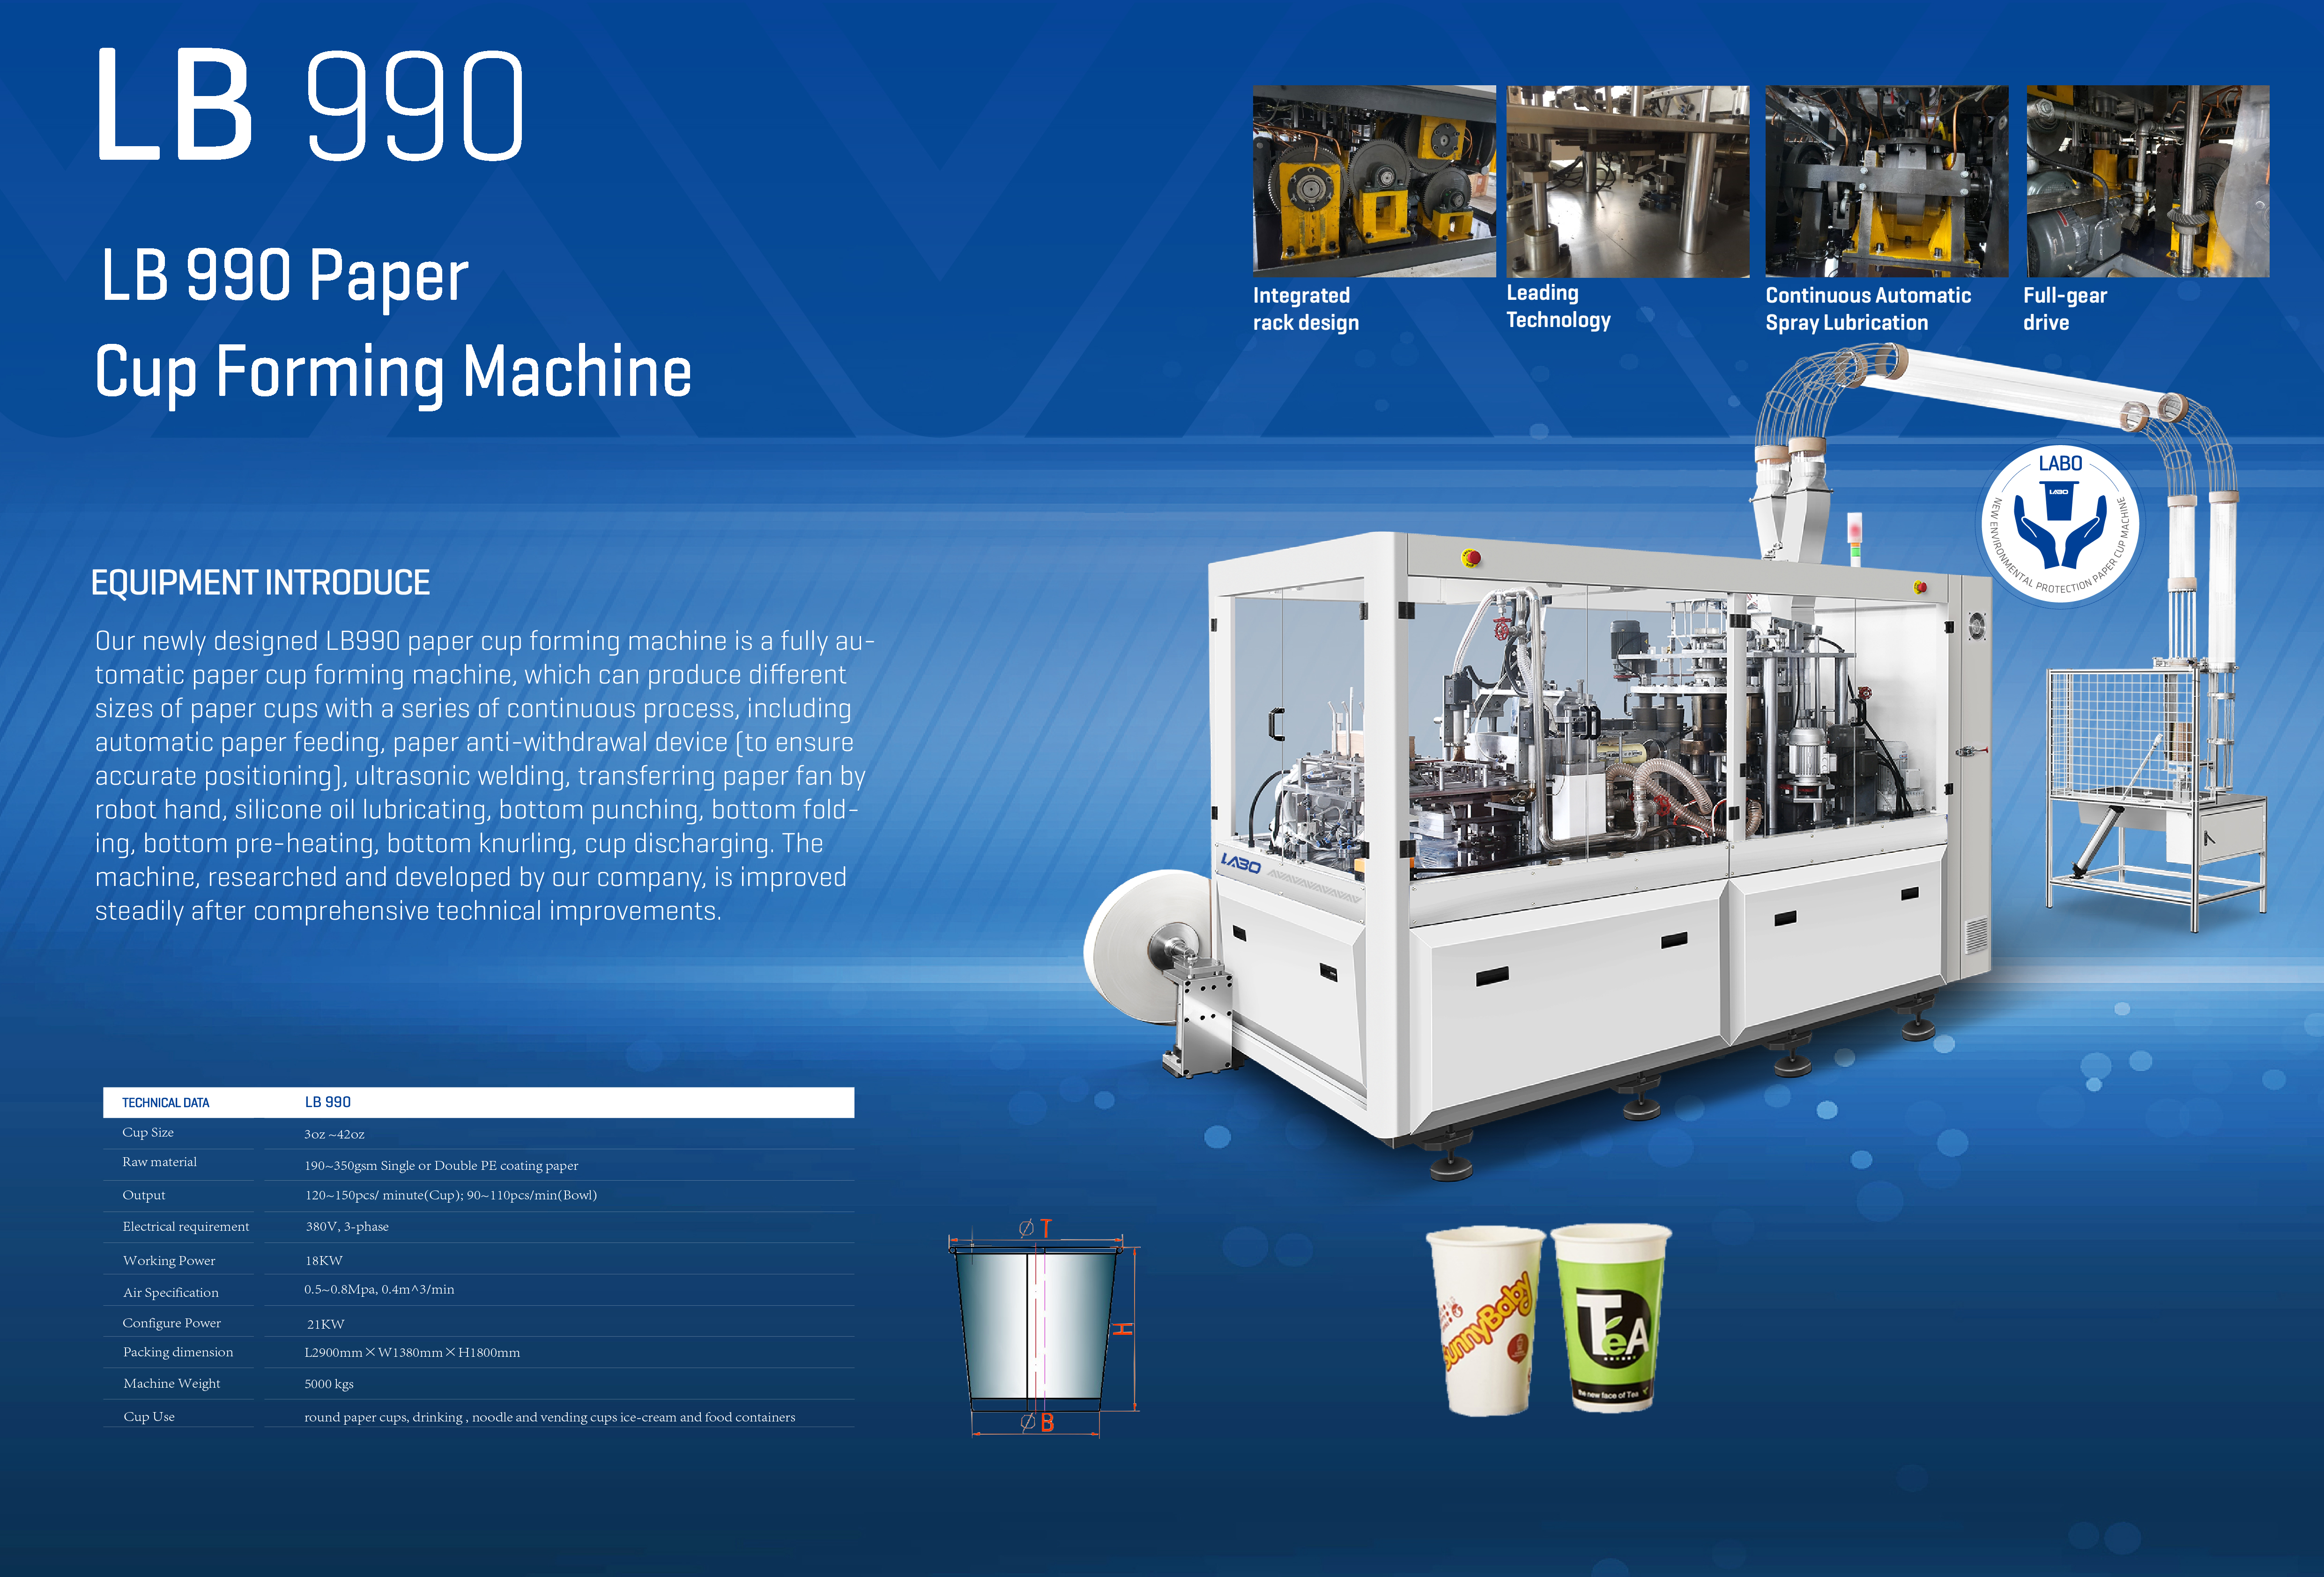 CUP FORING MACHINE